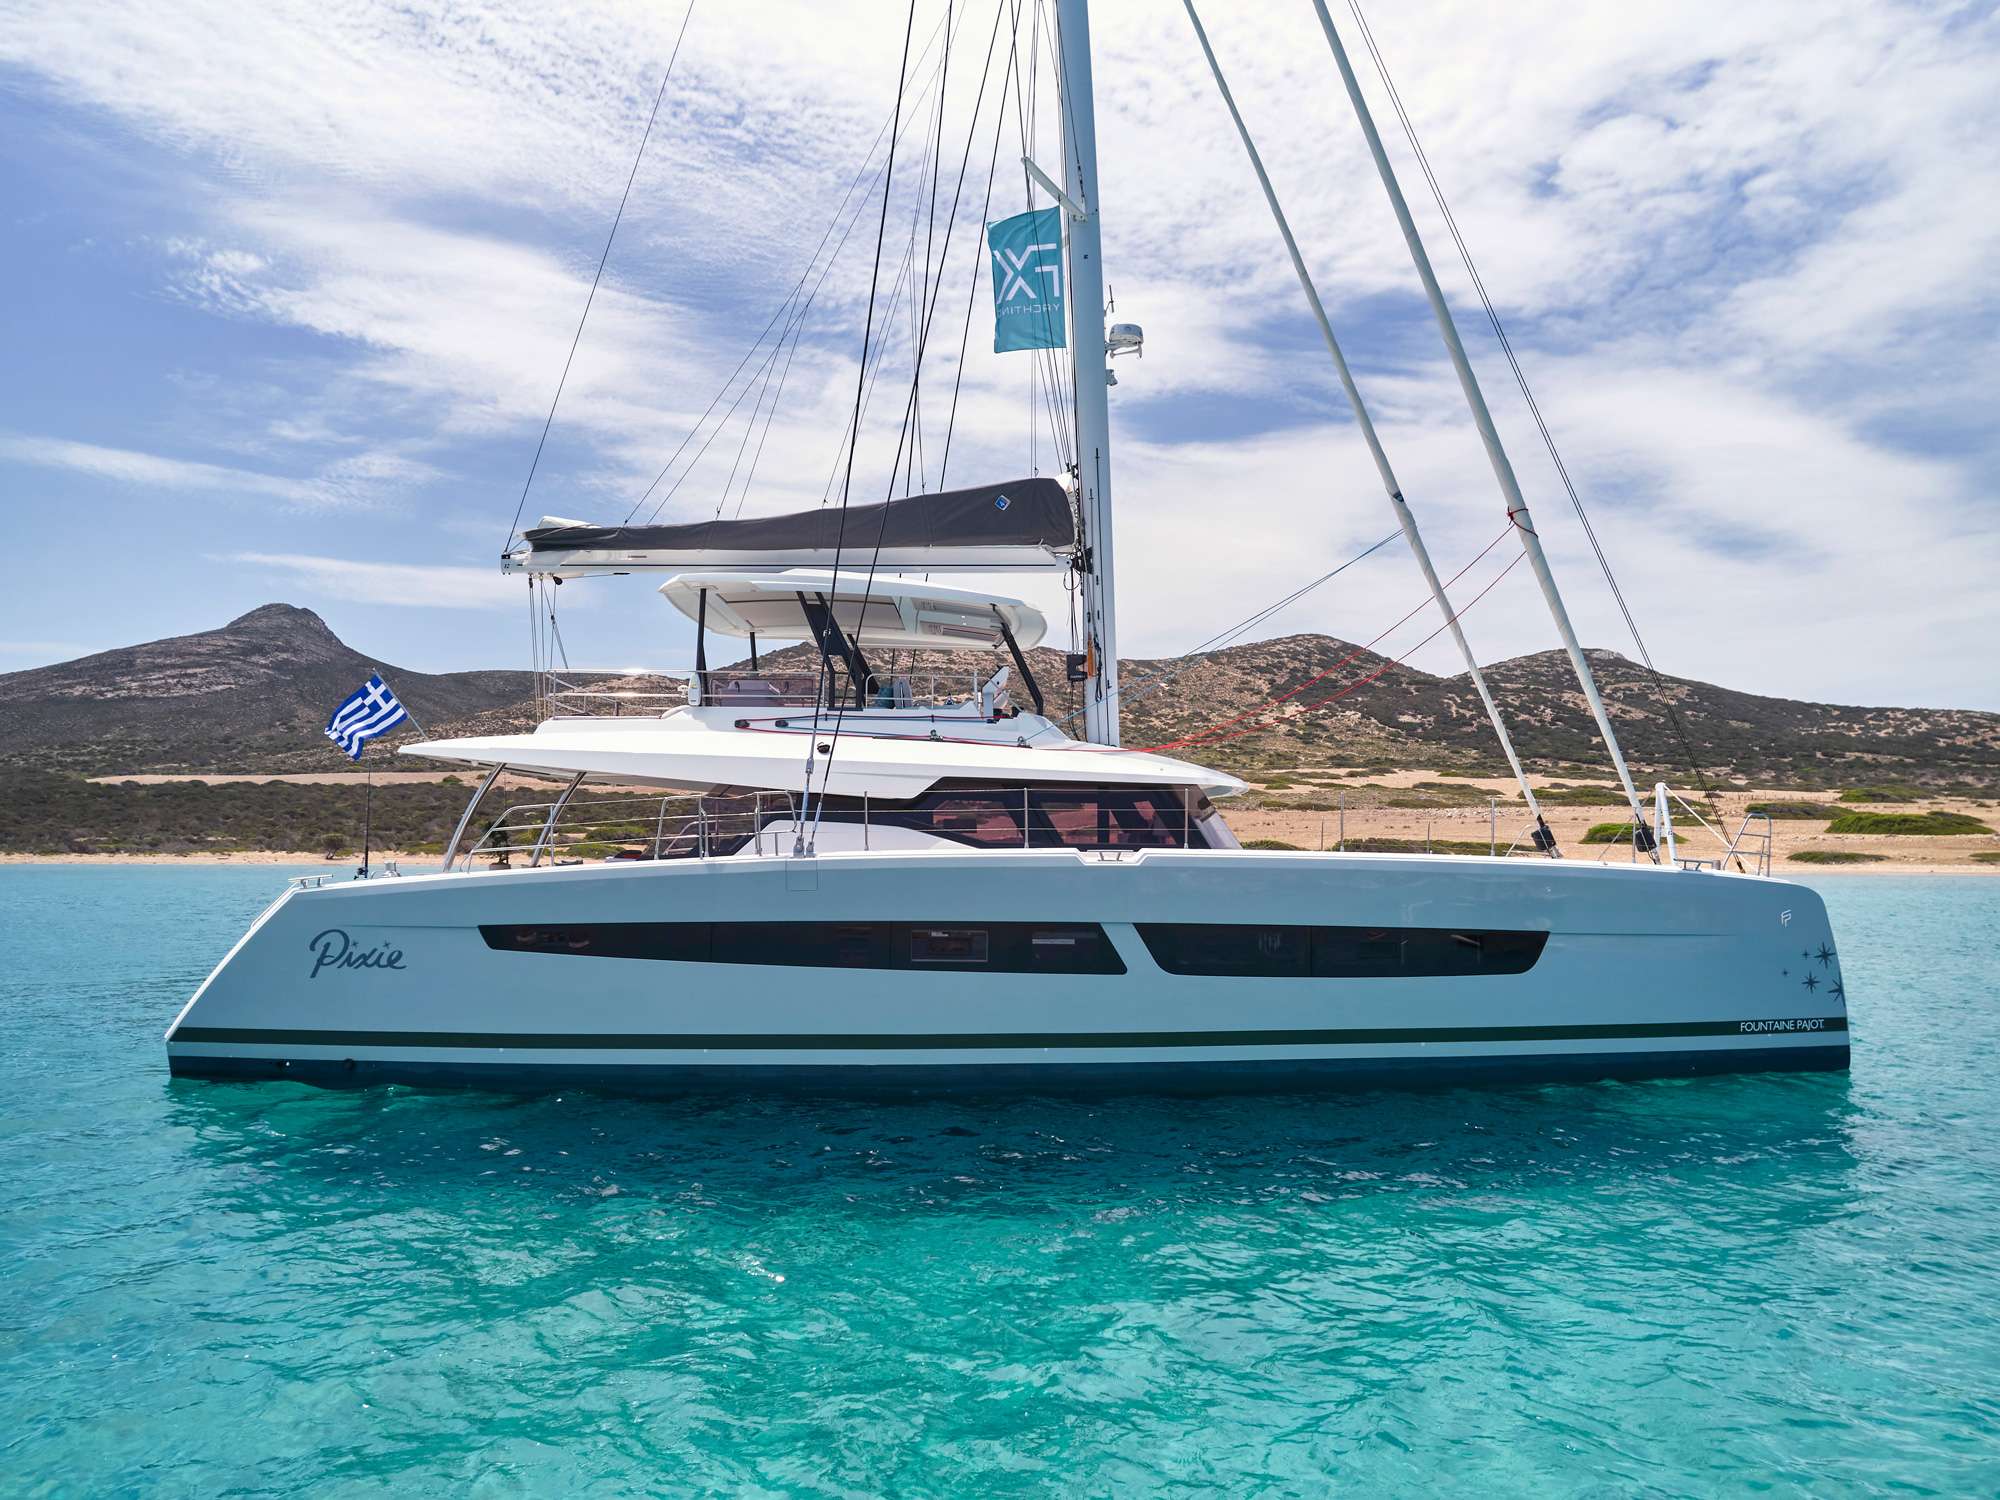 S/Y PIXIE is a  Fountaine Pajot Alegria 67, she is a remarkably beautiful and comfortable sailing catamaran designed by Berret Racoupeau Yachts Design for the most discerning sailors. Its incredibly spacious flybridge provides unrivaled comfort, and its bow cockpit, which features a separate Jacuzzi zone, symbolizes a lifestyle worthy of the best. 

S/Y PIXIE boasts extraordinary performance characteristics for a catamaran of its size, including good handling and the ability to sail on sharp courses. 
When boarding S/Y PIXIE, everyone anticipates huge, useful spaces, but , reality genuinely exceeds expectations. The exquisite interior features softer and more asymmetrical lines in accordance with modern design trends. 

Notable is the bathing platform, which is ideal for cocktails and lounging at sea level. 